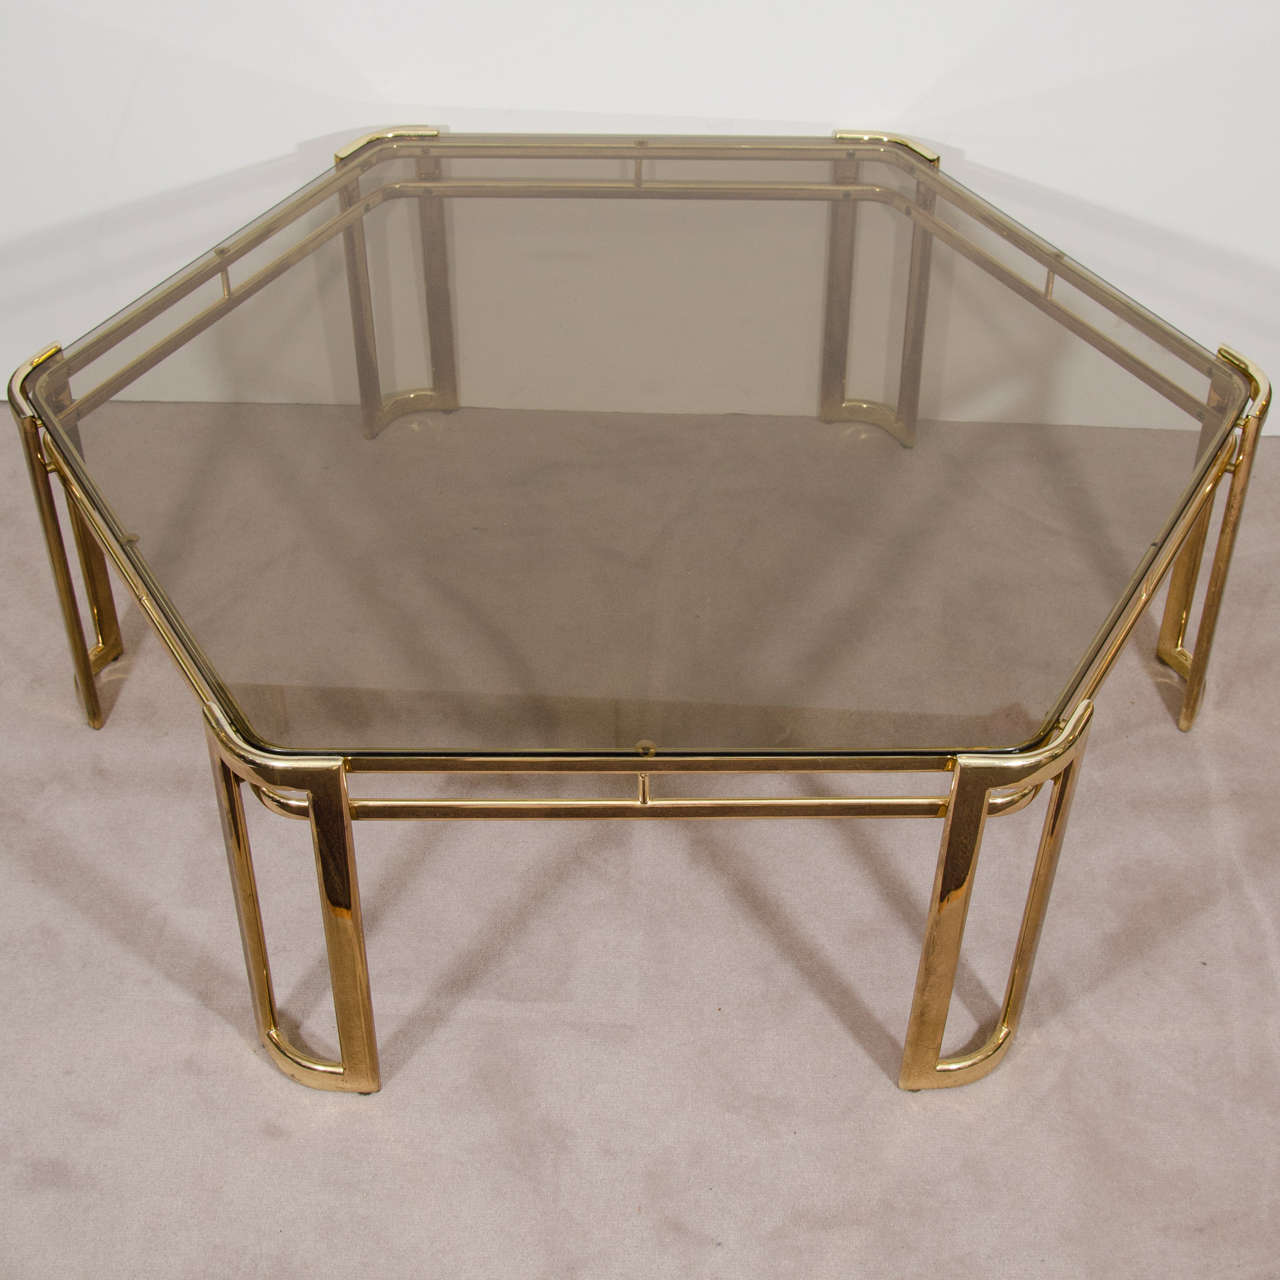 20th Century Midcentury Brass-Plated Hexagonal Coffee or Cocktail Table